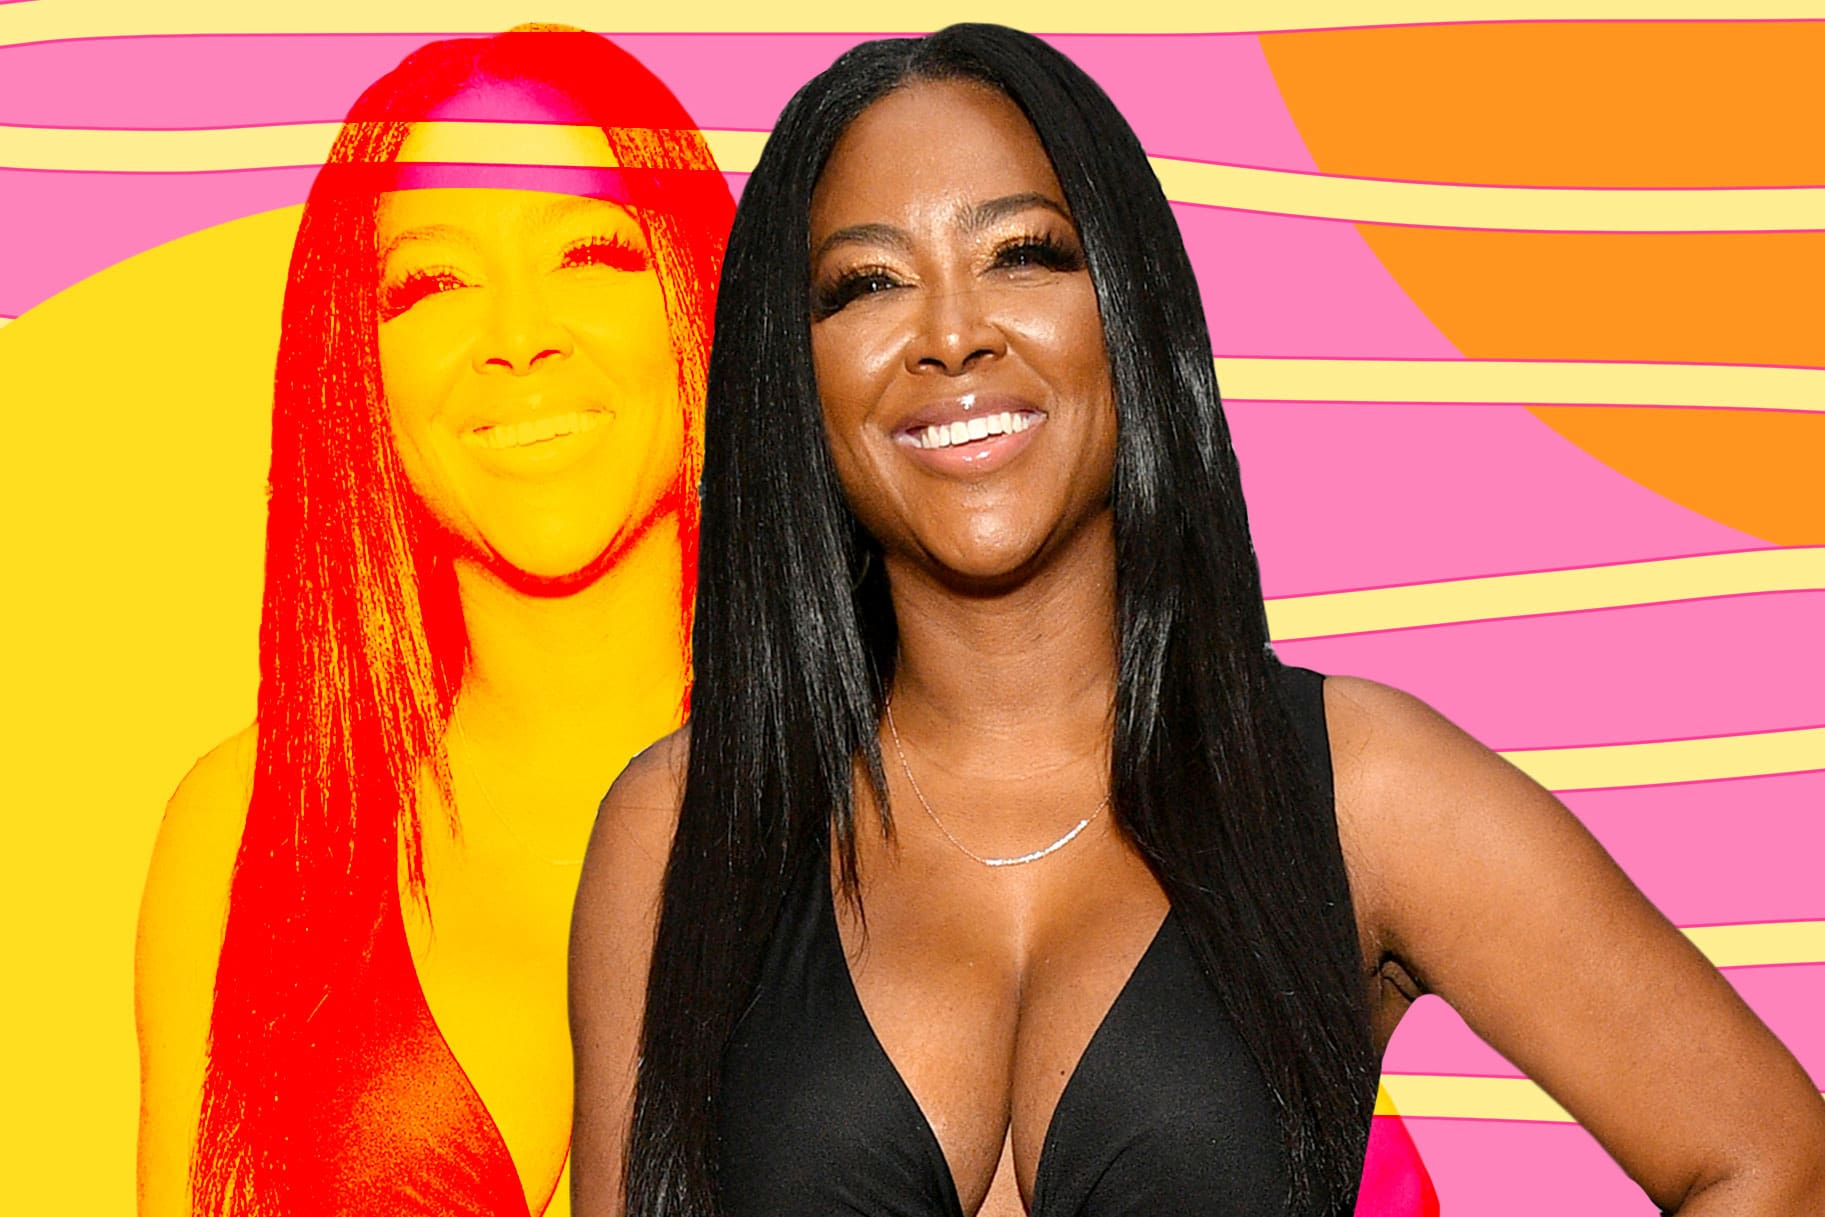 Kenya Moore Flaunts Her Figure And Fans Cannot Believe That Her Waist Is Tinier Now Than Before The Baby